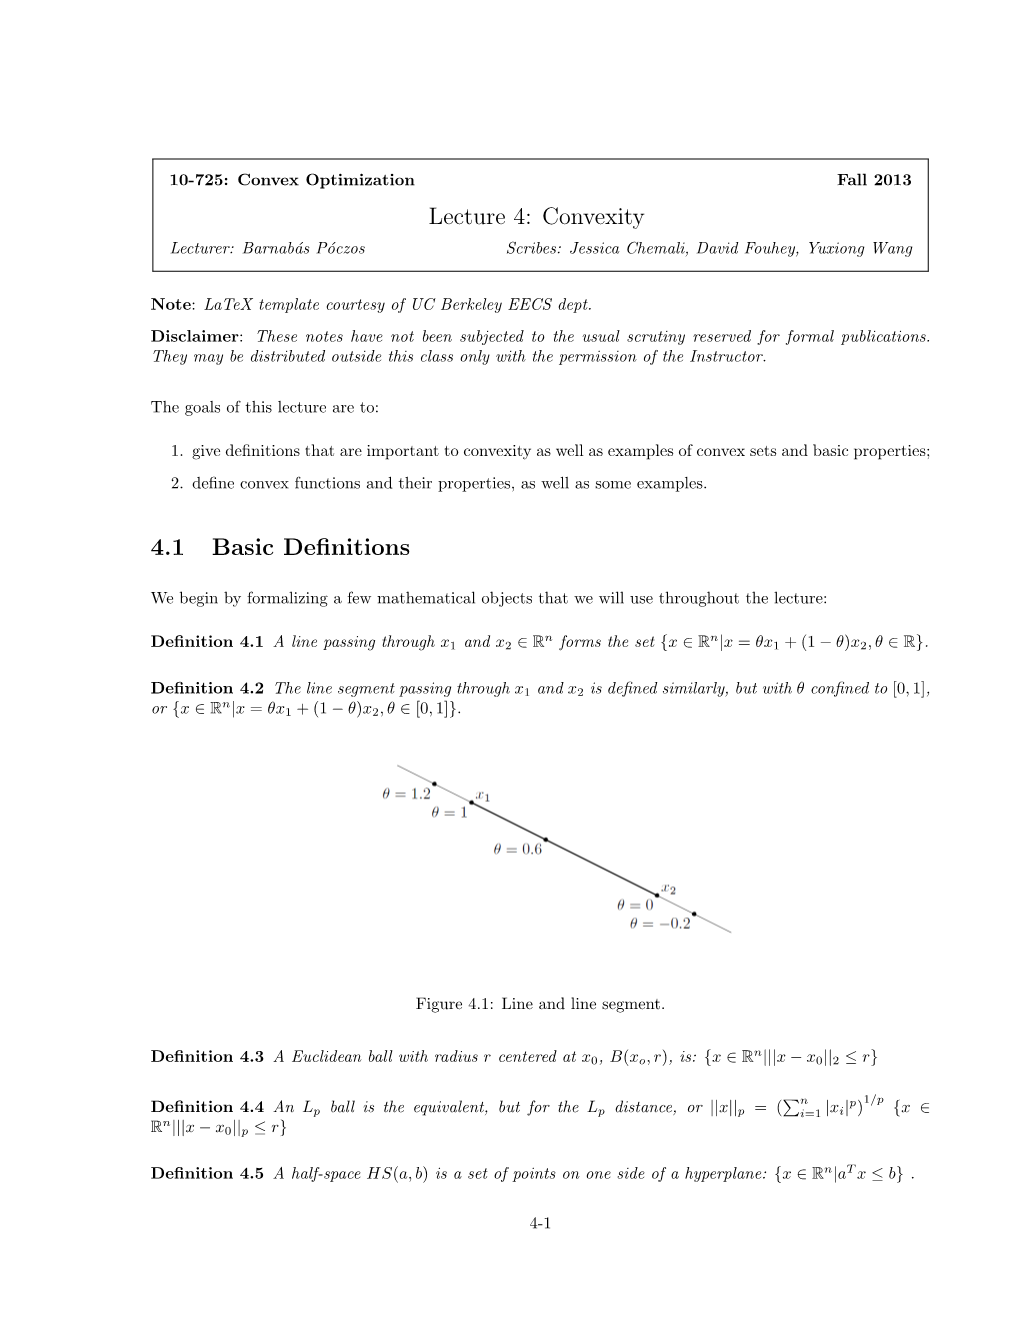 Lecture 4: Convexity 4.1 Basic Definitions